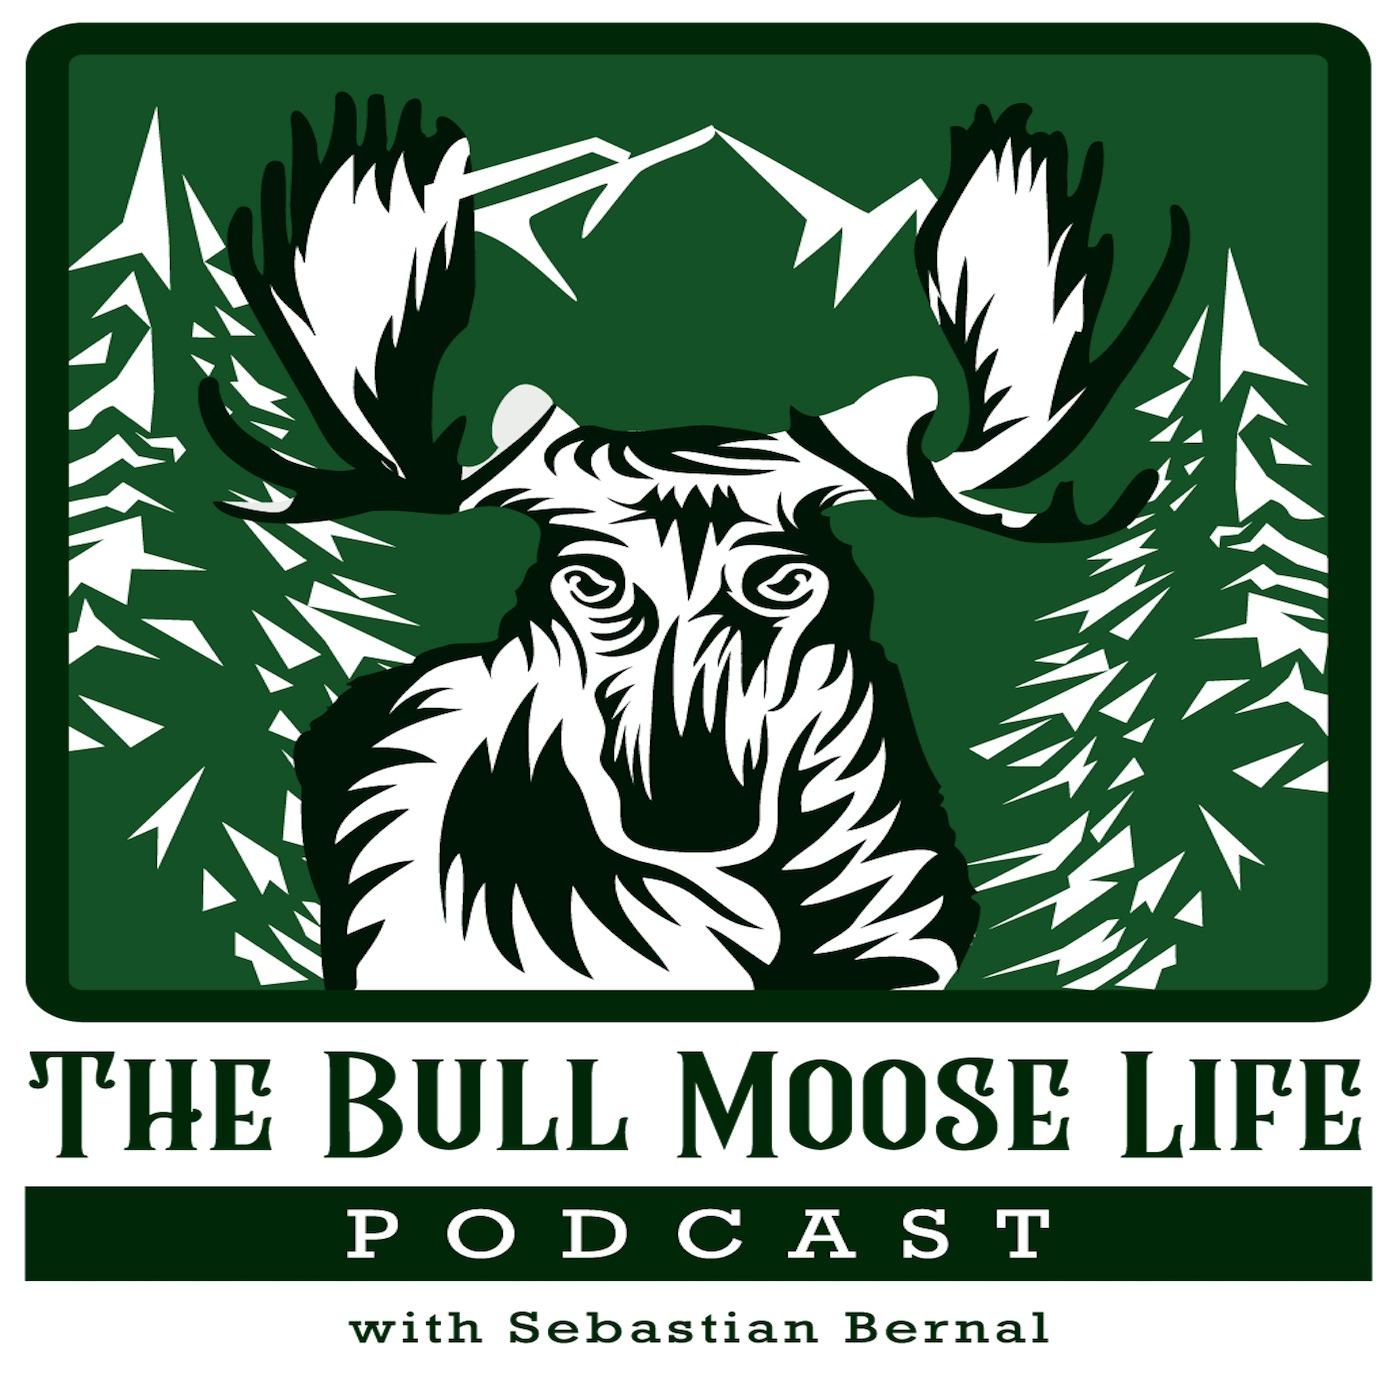 The Bull Moose Life Podcast